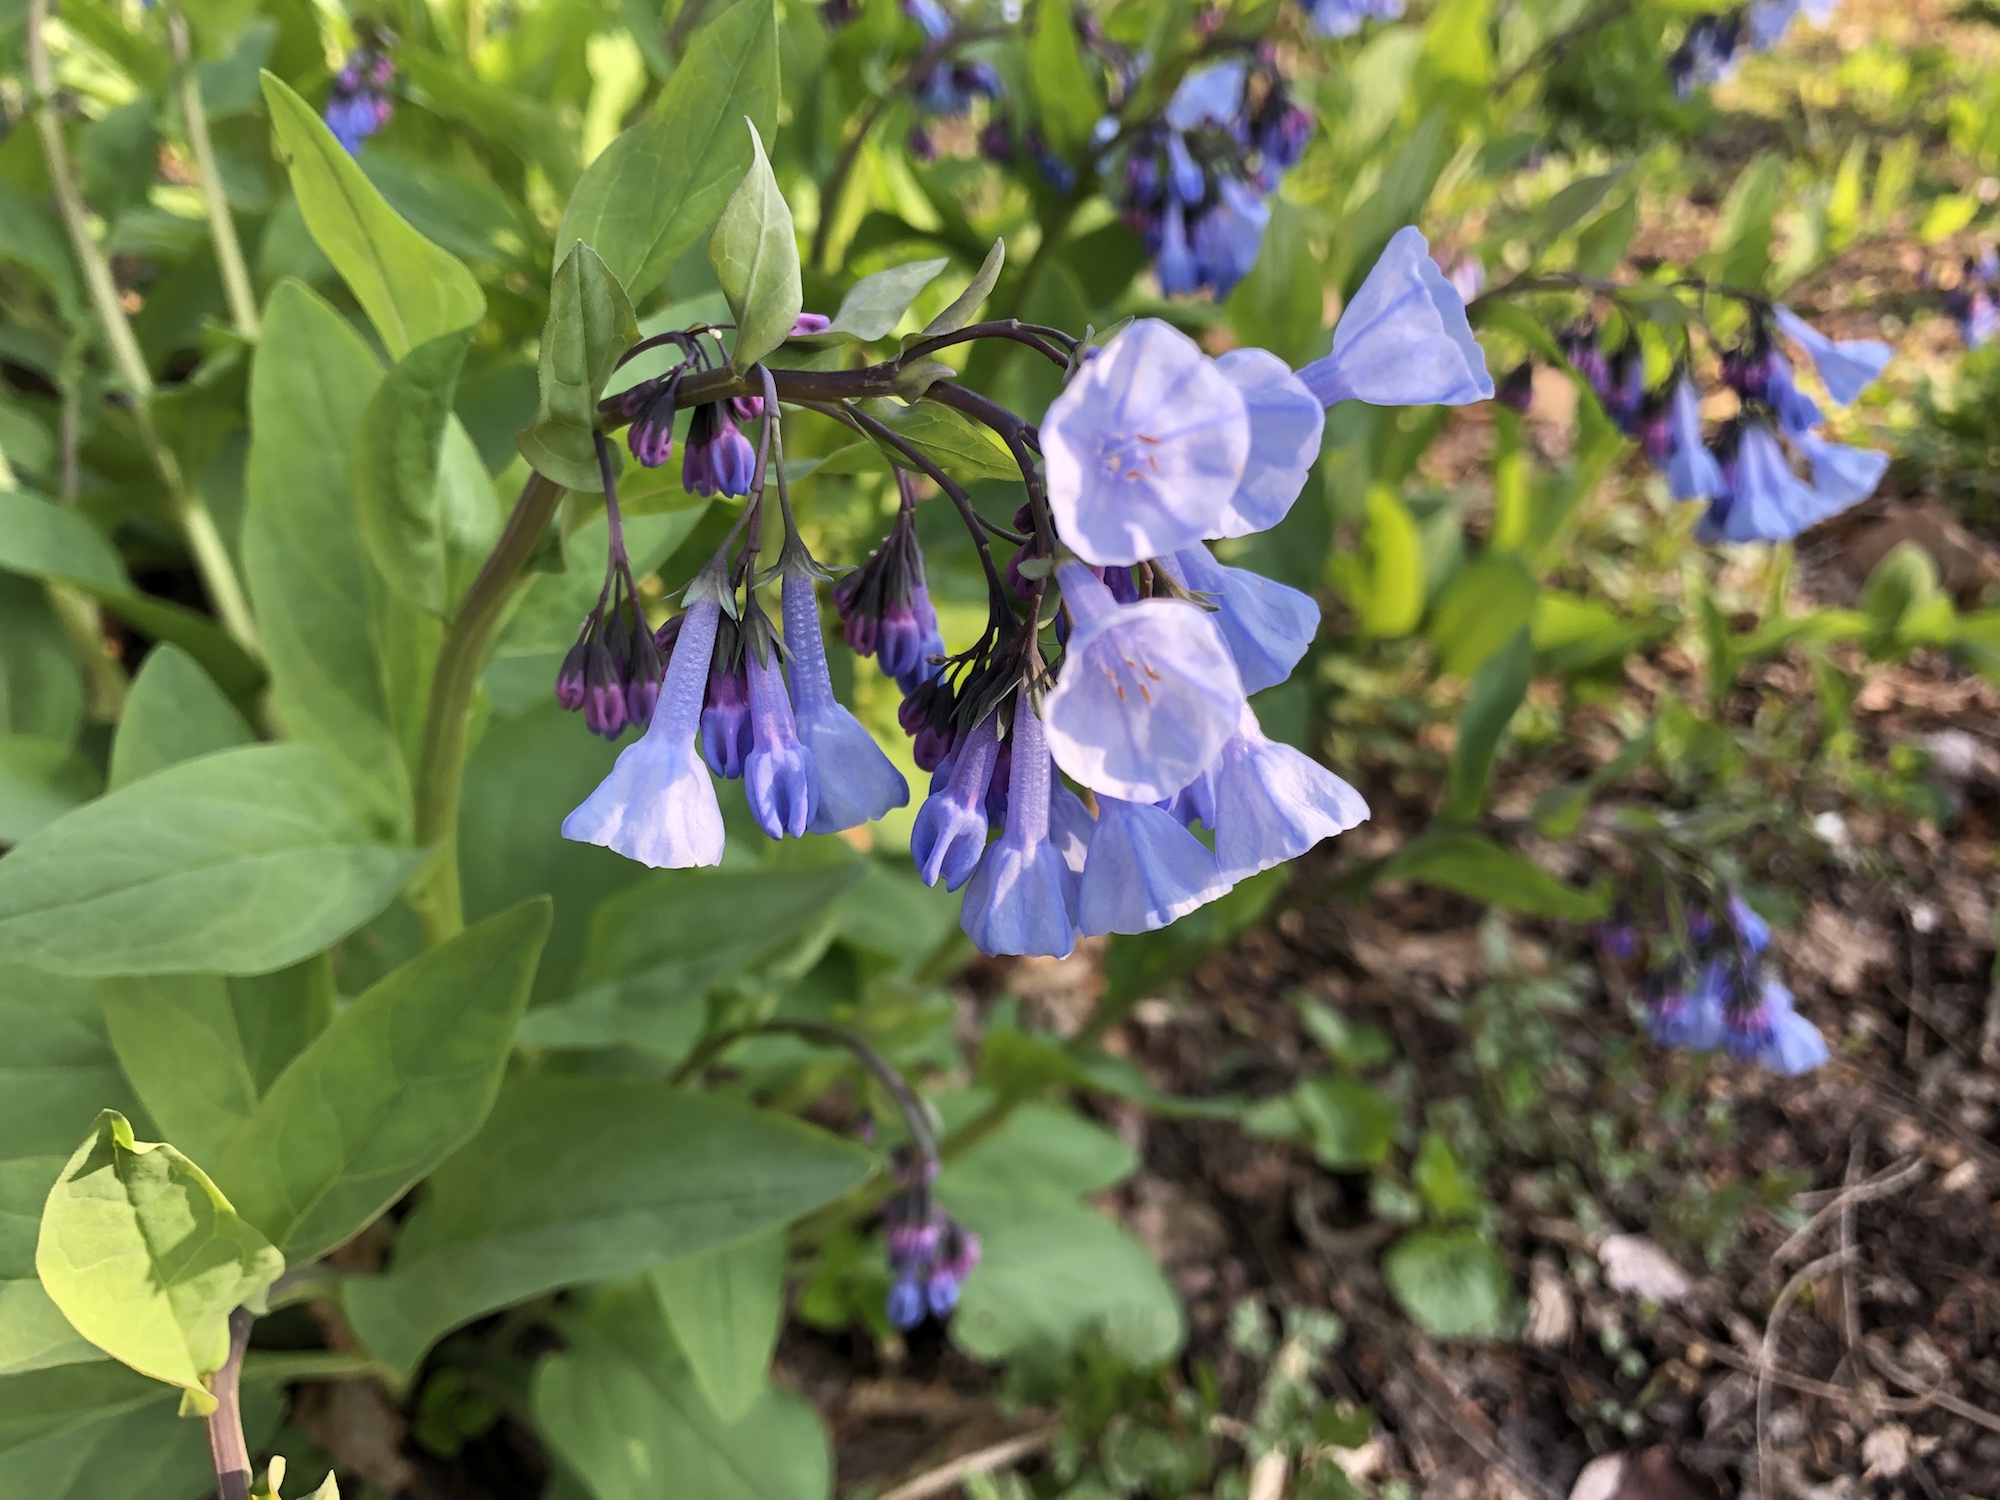 Virginia Bluebells around the Duck Pond in Madison, Wisconsin onApril 25, 2019.